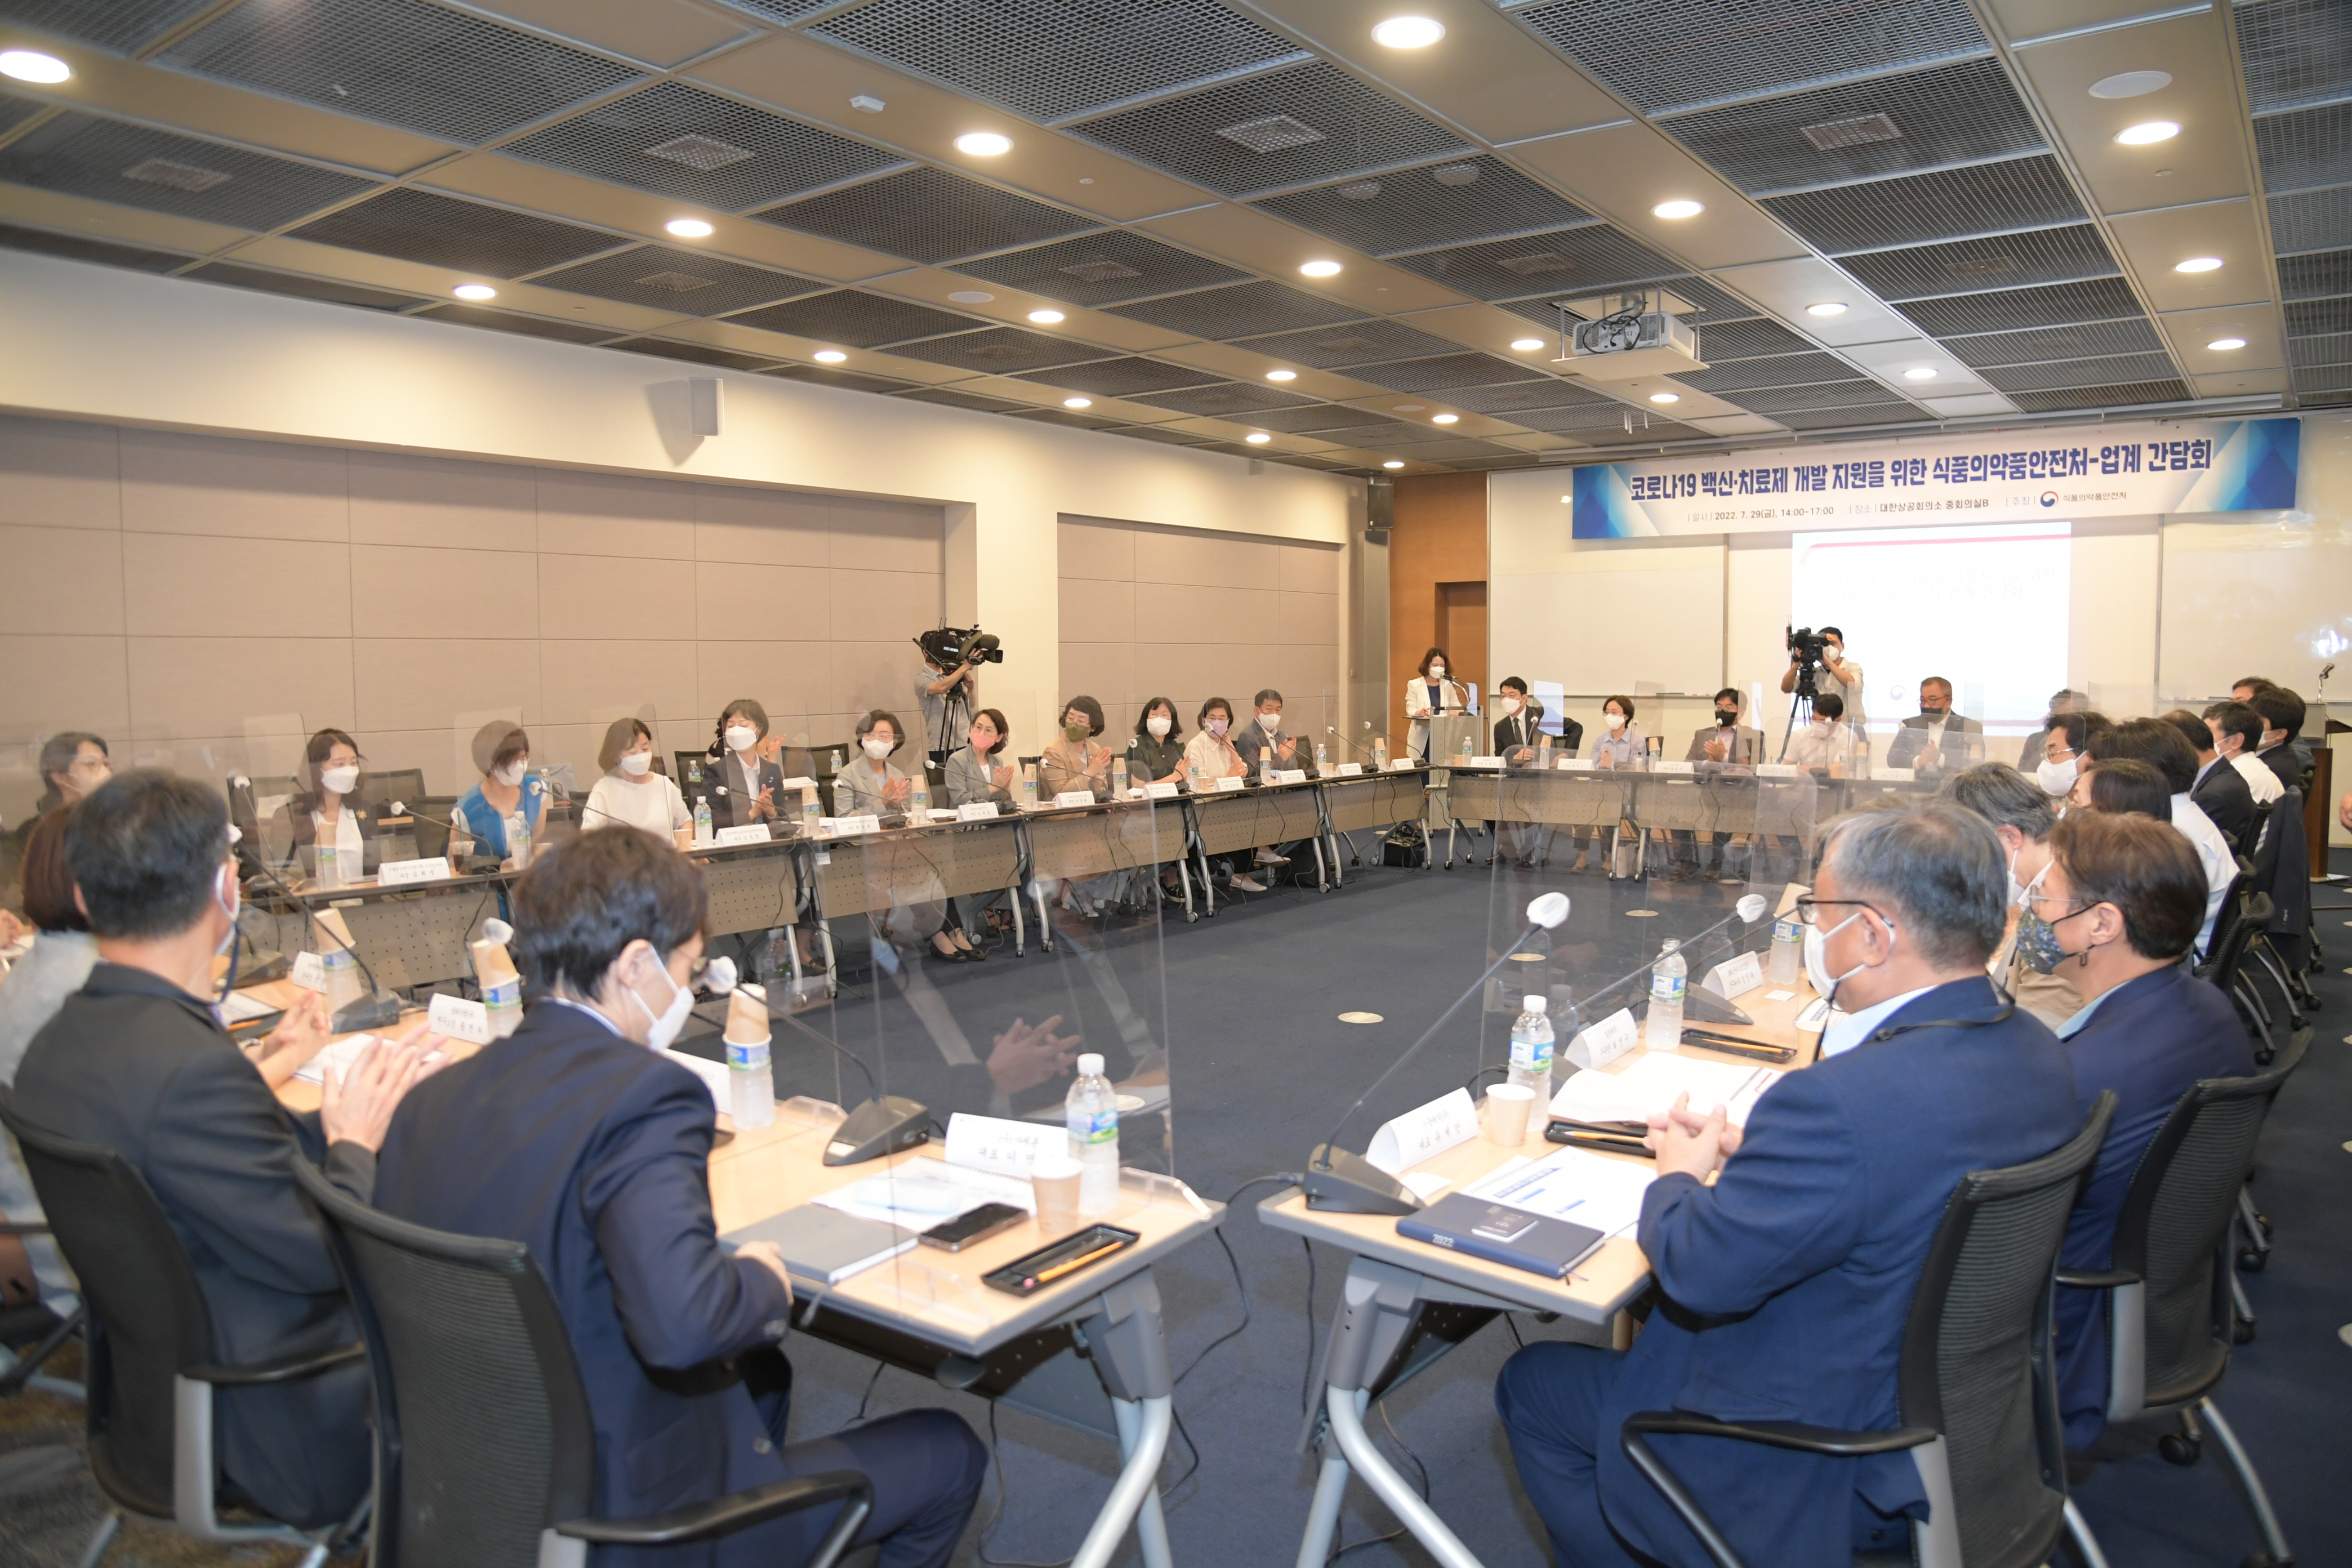 Photo News3 - [July 29, 2022] Minister Attends the Industry Meeting to Support Development of COVID-19 Vaccines and Therapeutics